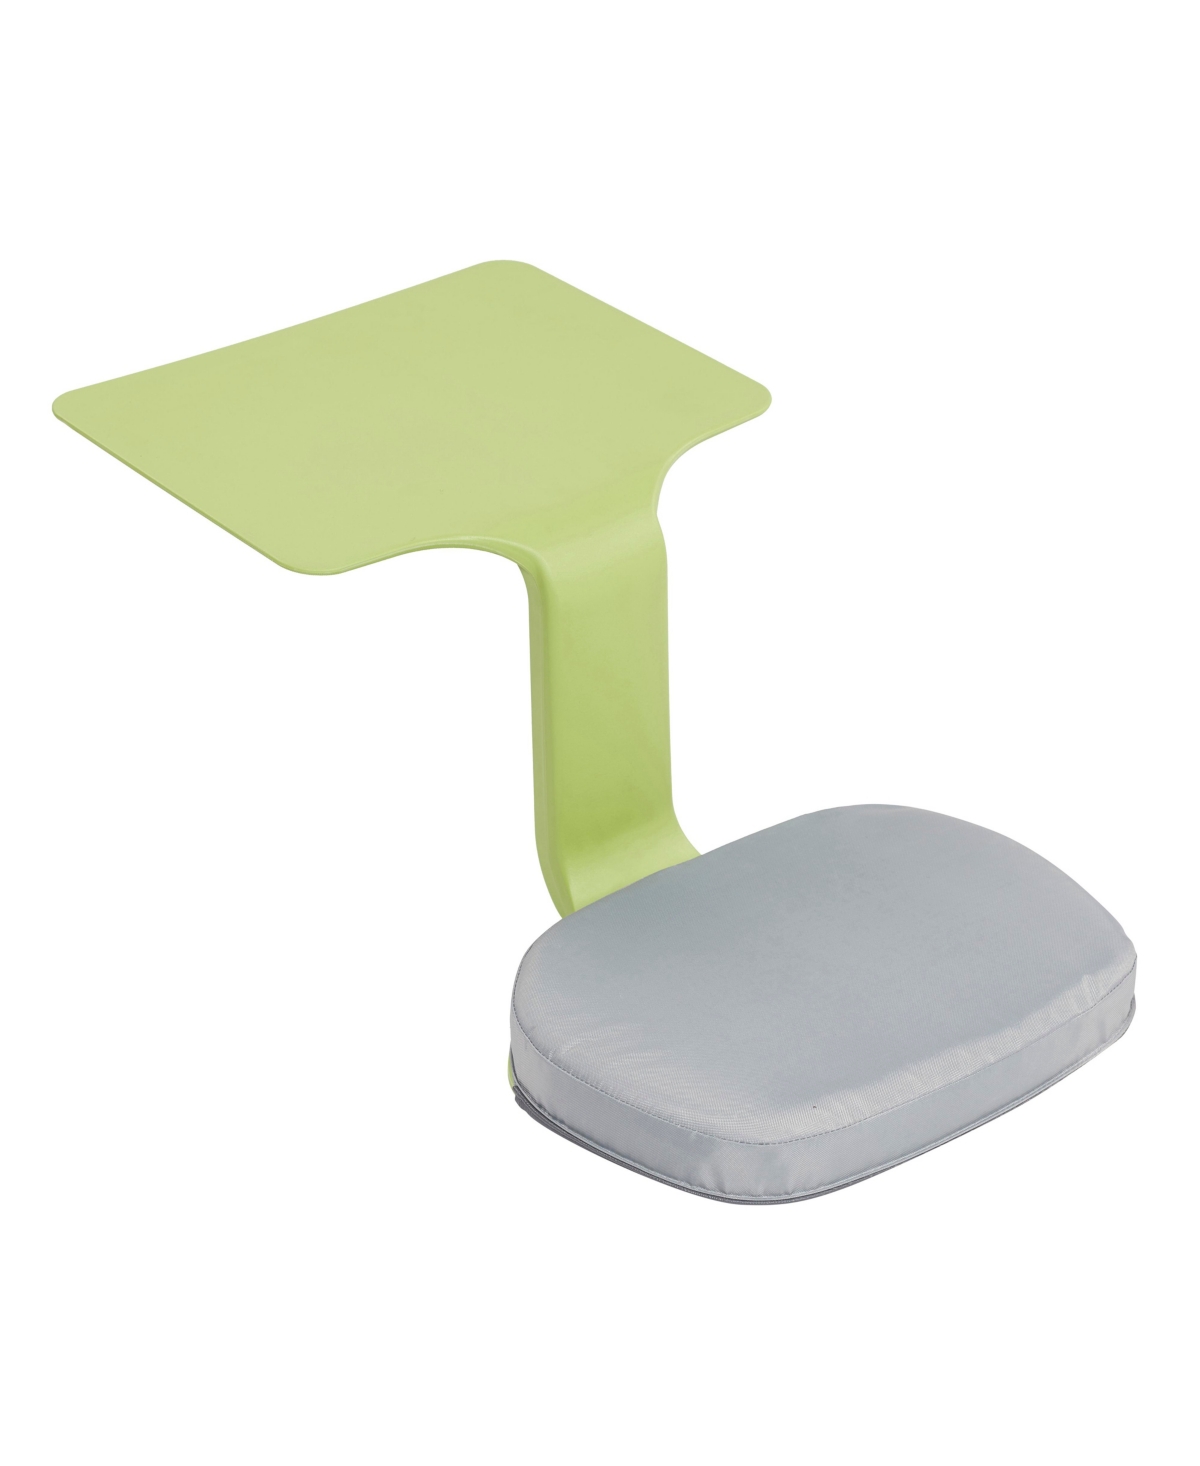 The Surf Portable Lap Desk with Cushion, Flexible Seating, Green - Light grey